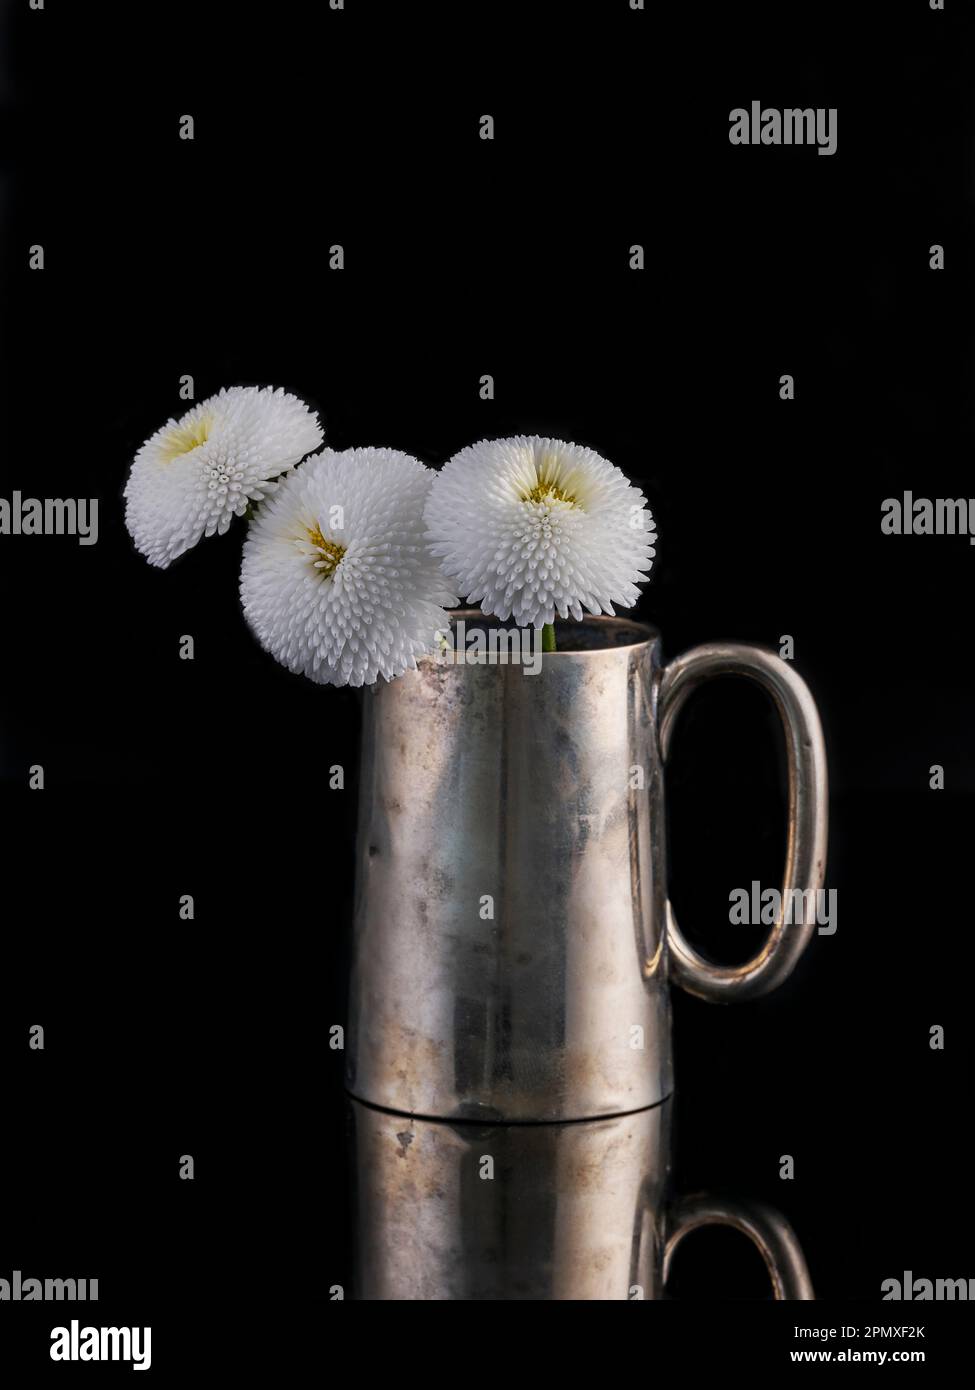 Artful still life of a vintage silver flower vase on black mirrored background with three beautiful white daisy flowers. Stock Photo